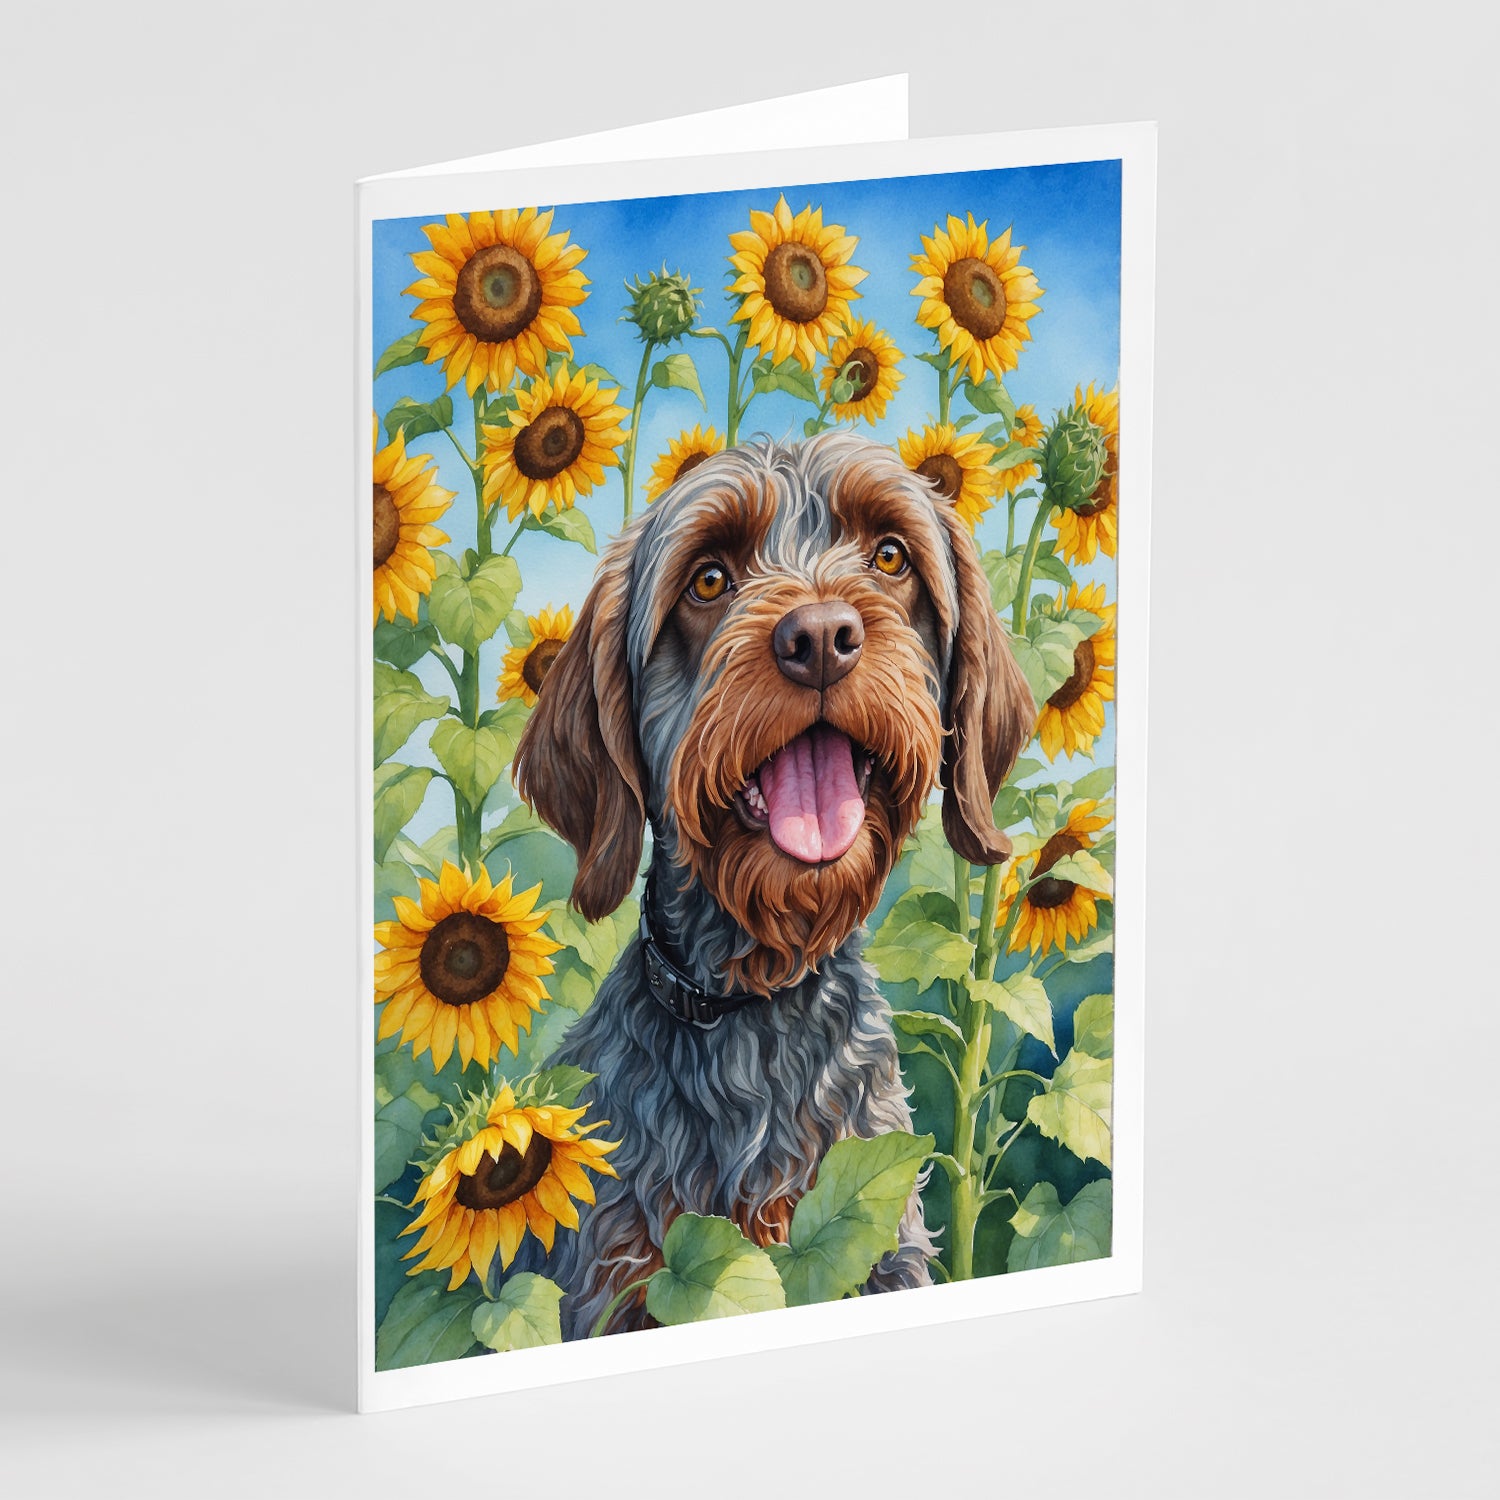 Buy this Wirehaired Pointing Griffon in Sunflowers Greeting Cards Pack of 8